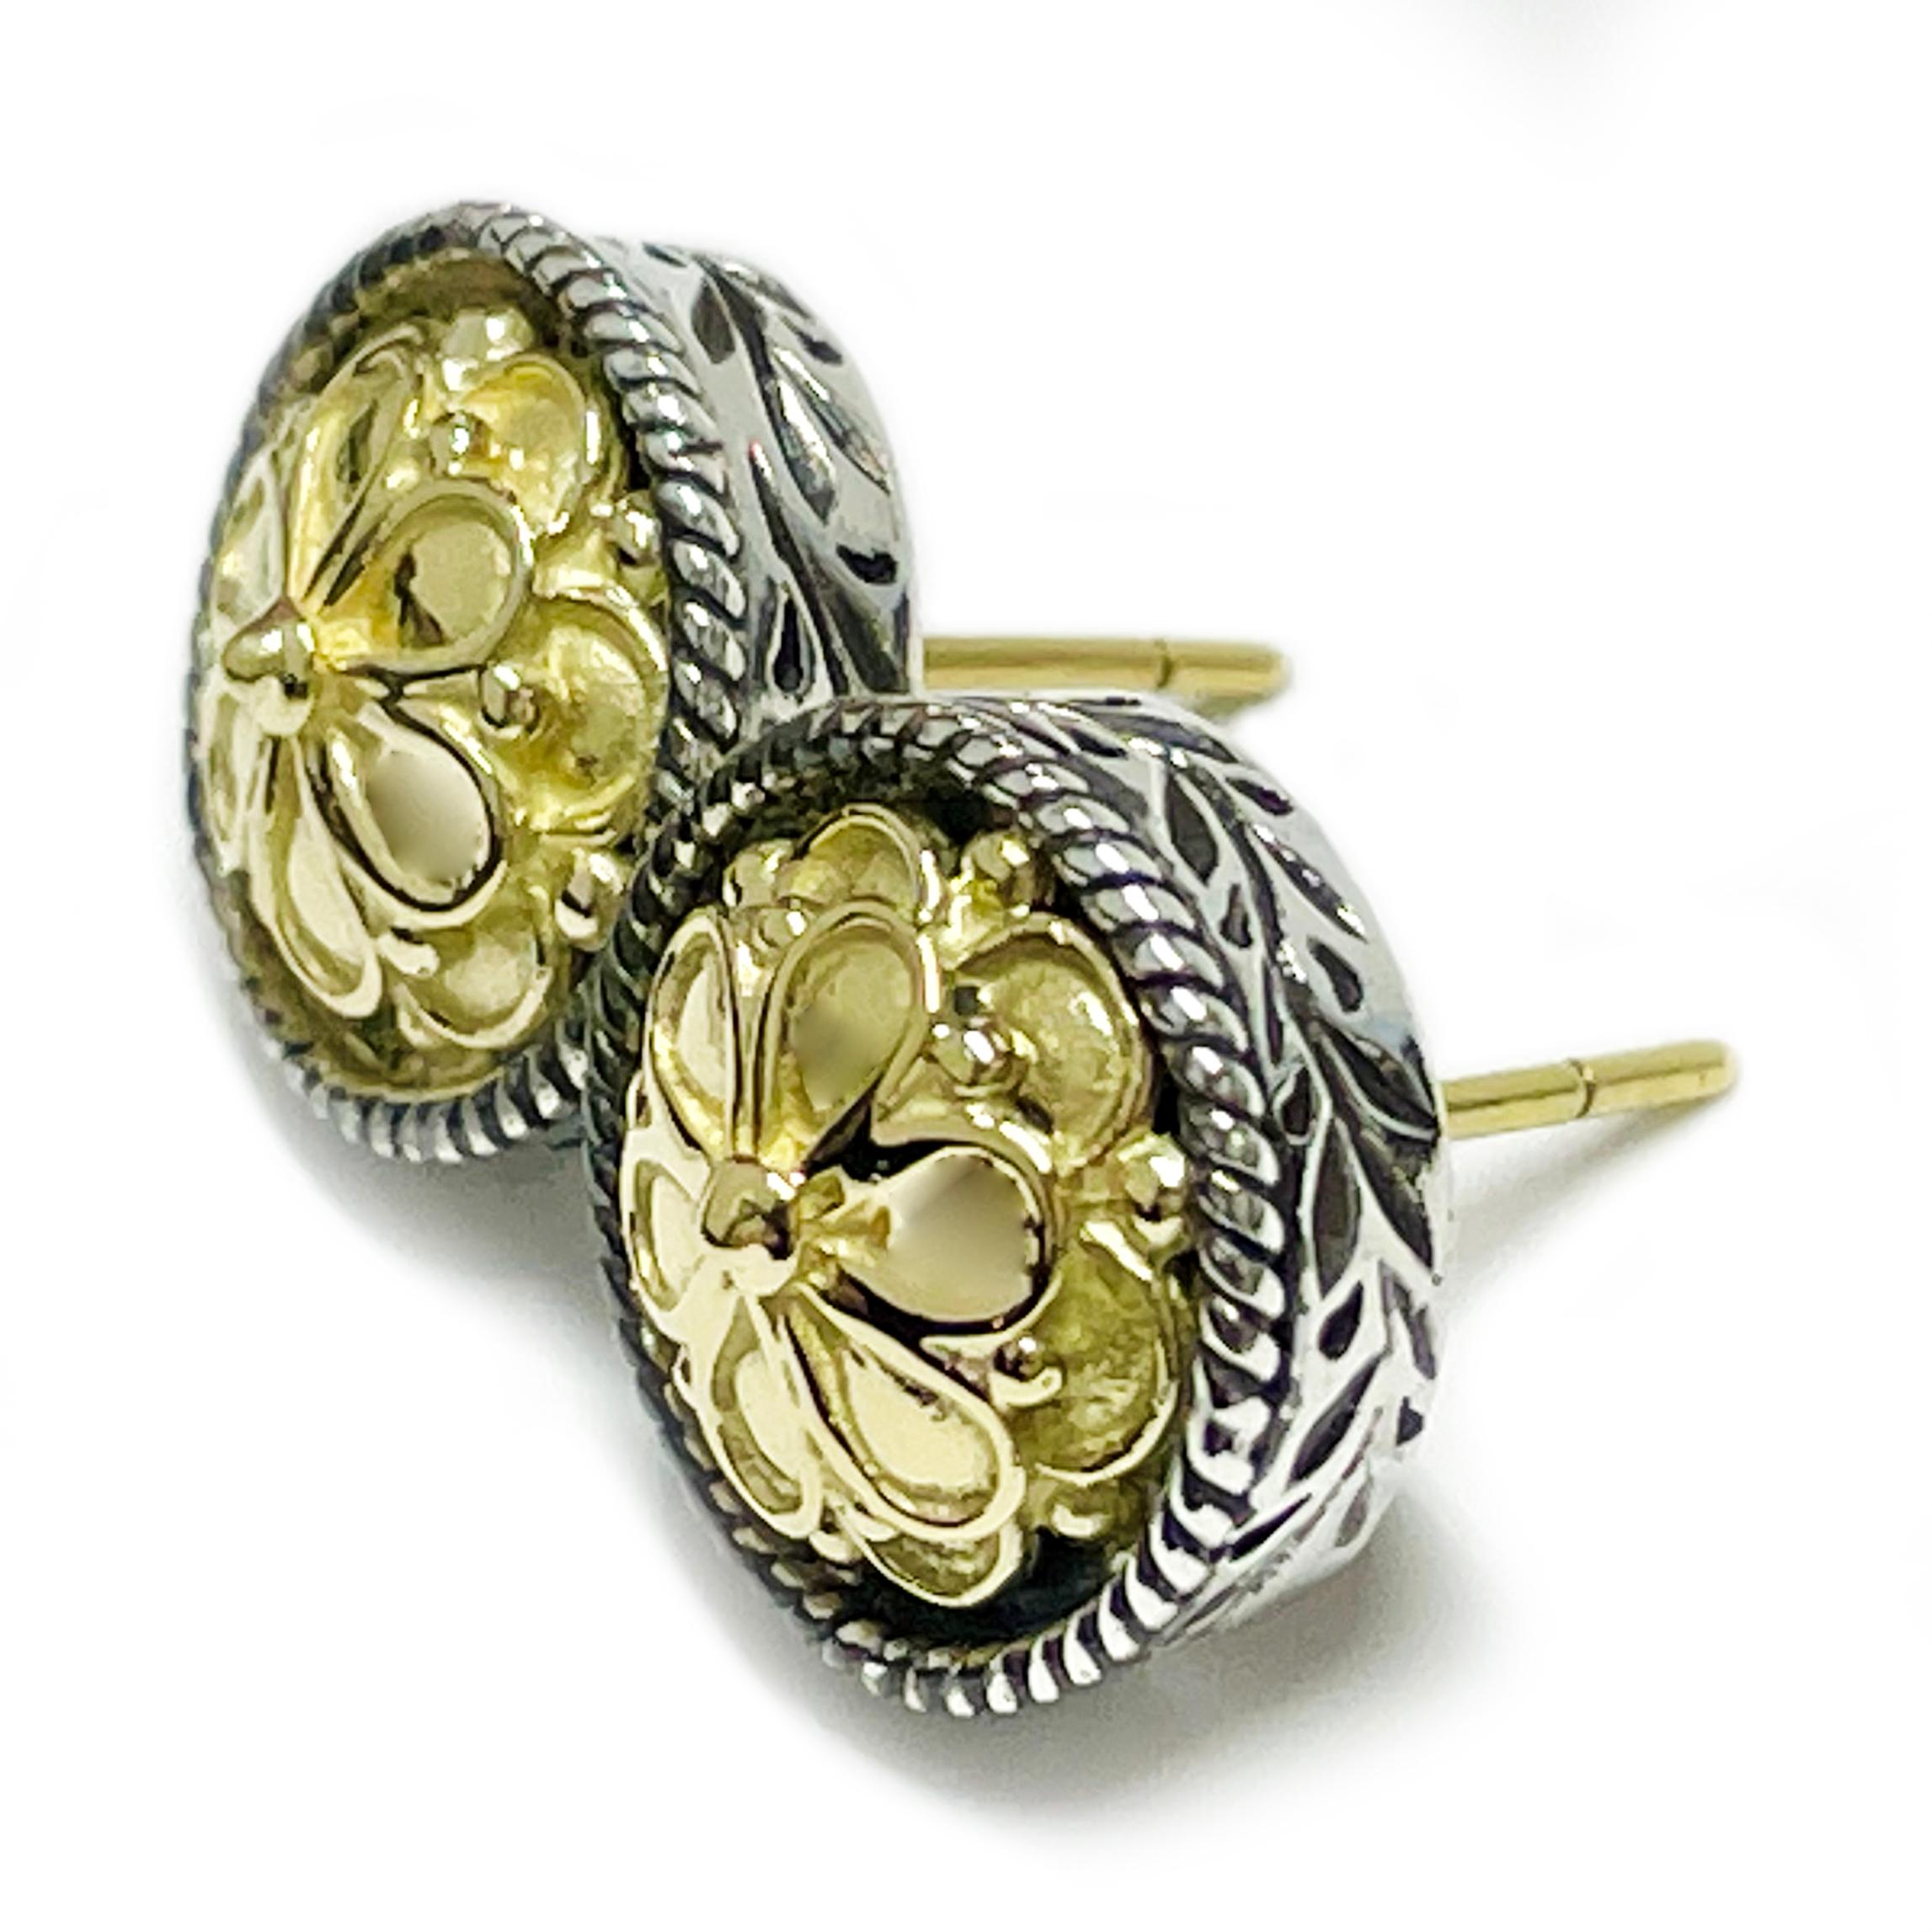 Konstantino 18 Karat Yellow Gold and Sterling Silver 925 Stud Earrings. These earrings are beautifully detailed with a two-tone double layer of flowers in the center of the studs and a silver vine and leaf pattern along the outer edge with a twisted